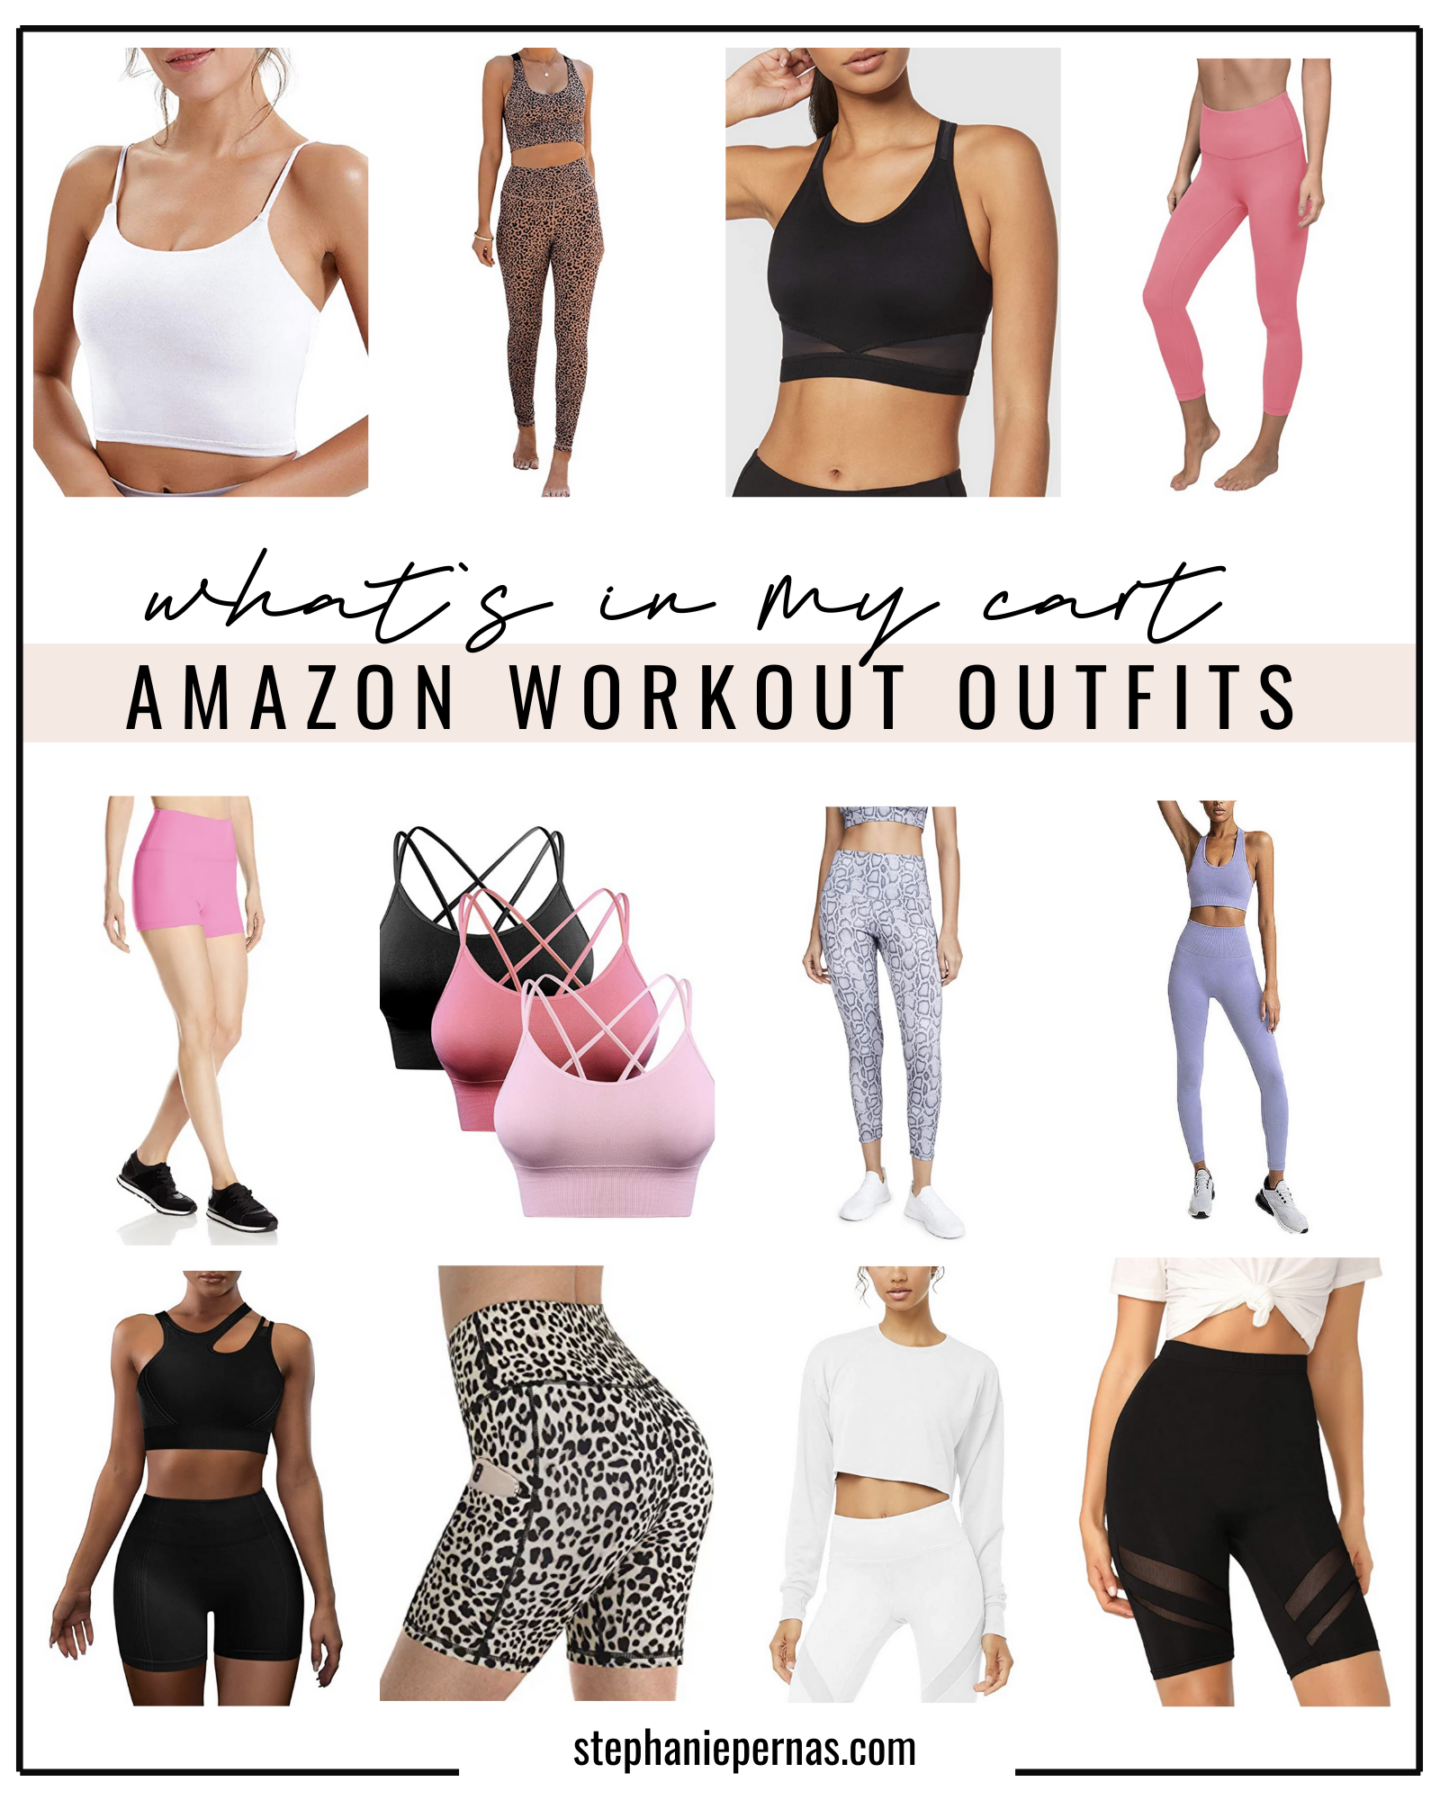 Amazon Workout Outfits in My Cart | Best Amazon Athleticwear for Women